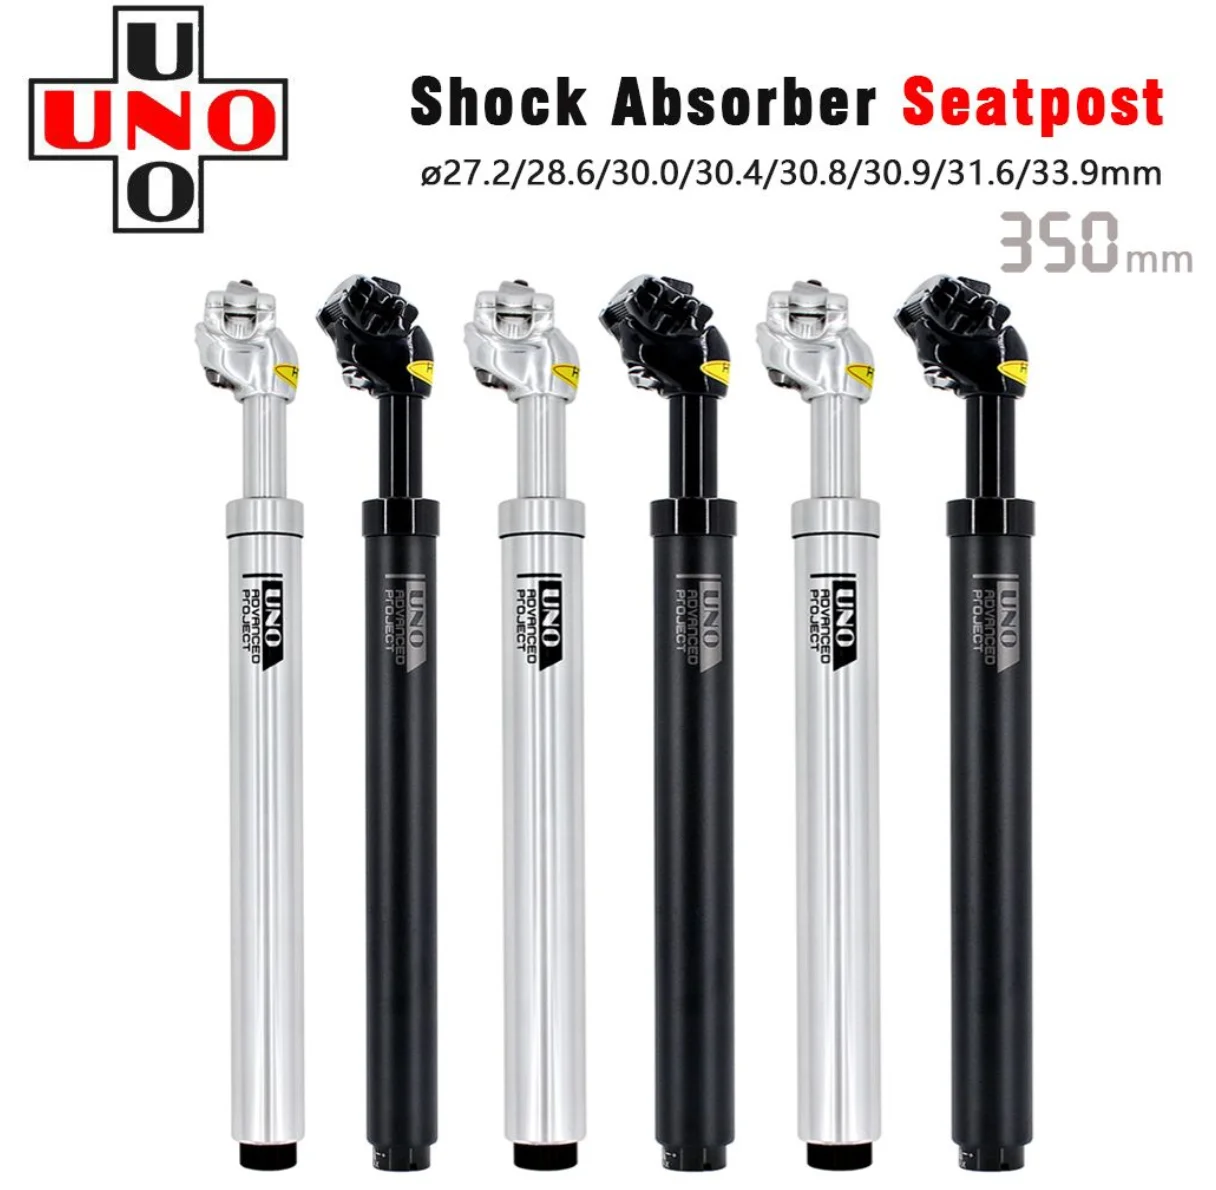 

UNO Mtb Bike Shock Absorber 350mm Suspension Seatpost 27.2/28.6/30/30.4/30.8/30.9/31.6/33.9mm for Dropper Seatpost Bicycle Parts